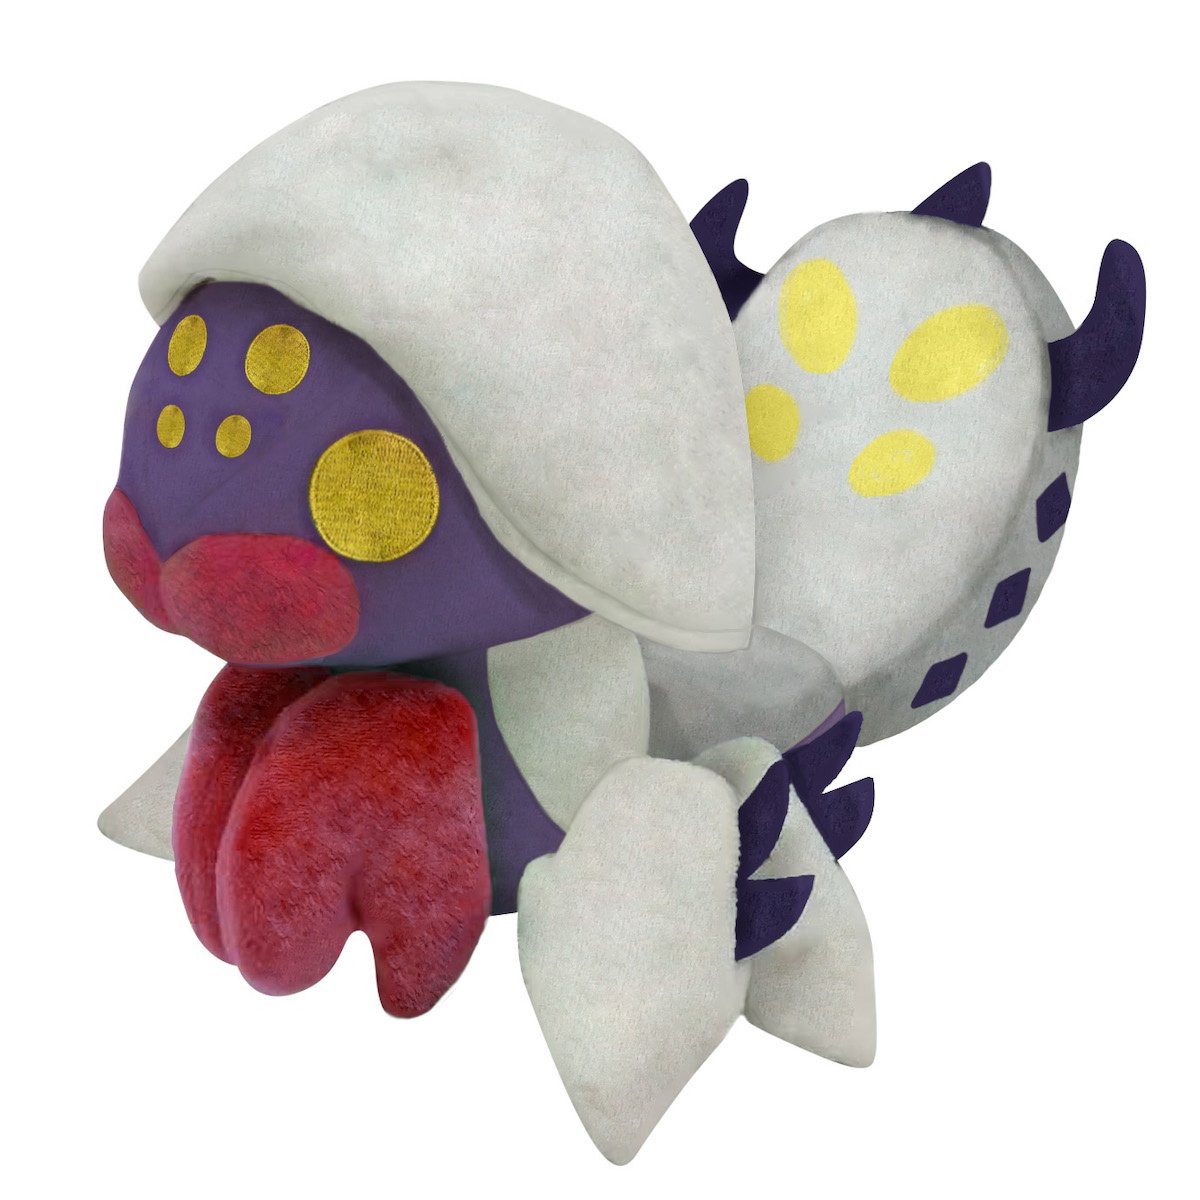 Experience the Thrill of Monster Hunter Plush Toys